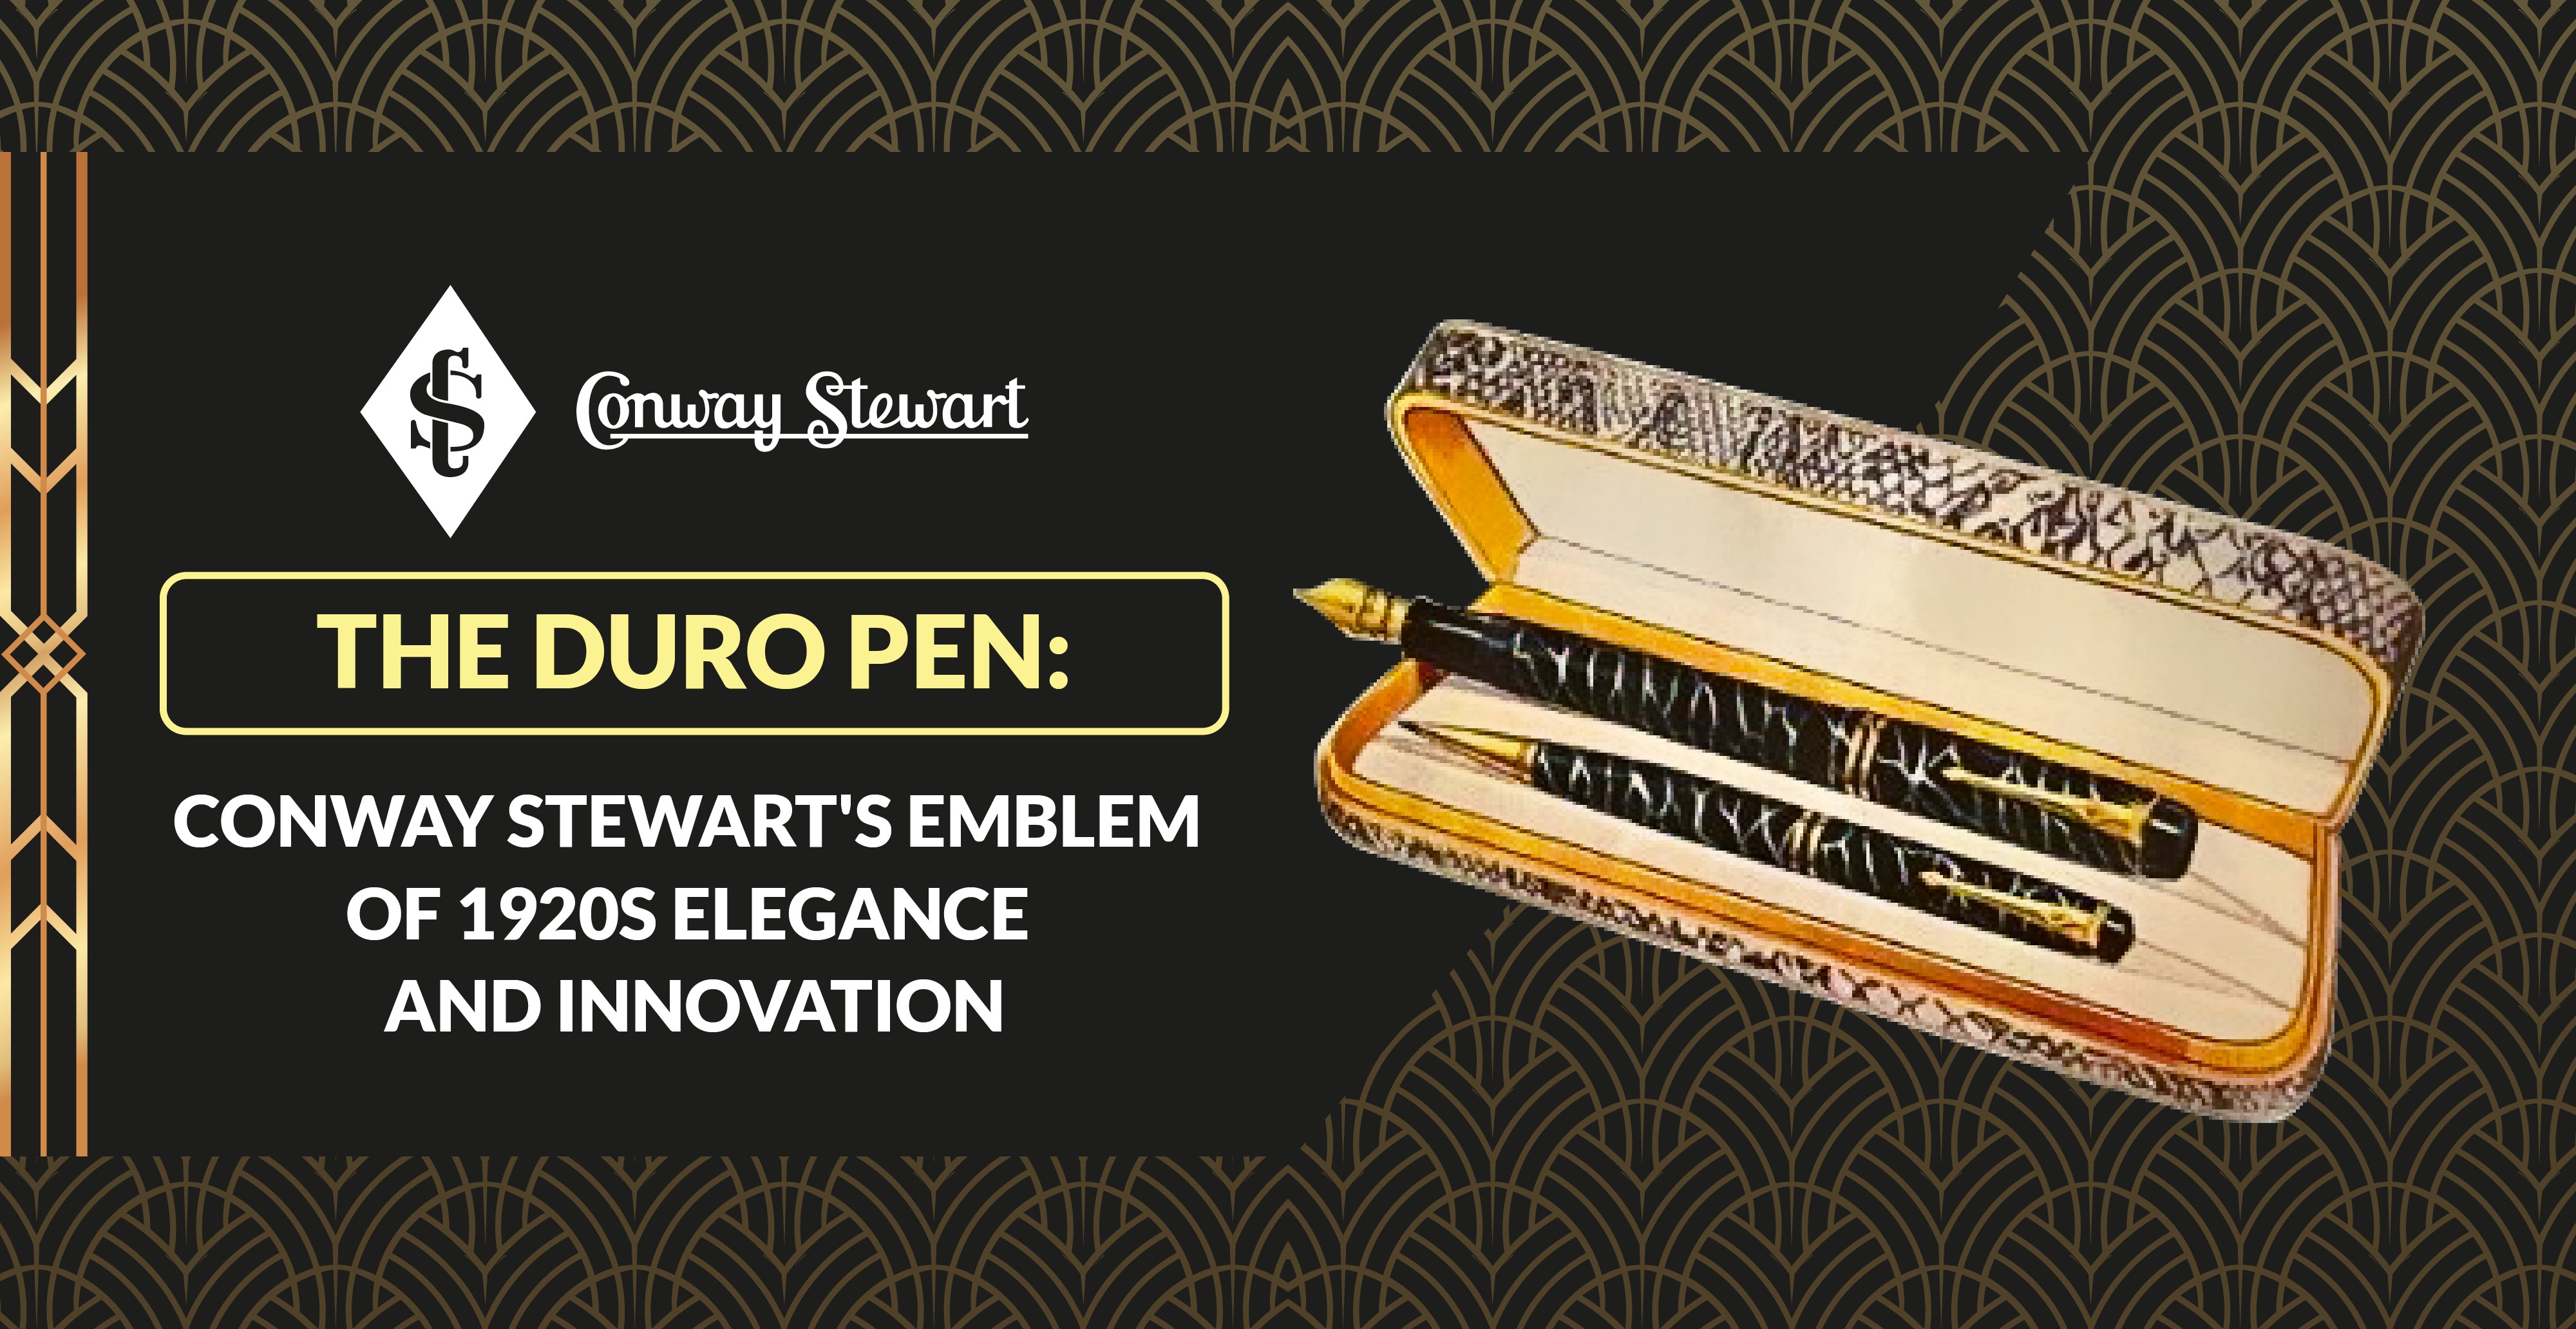 The Invention of the Conway Stewart Duro Pen in the 1920s